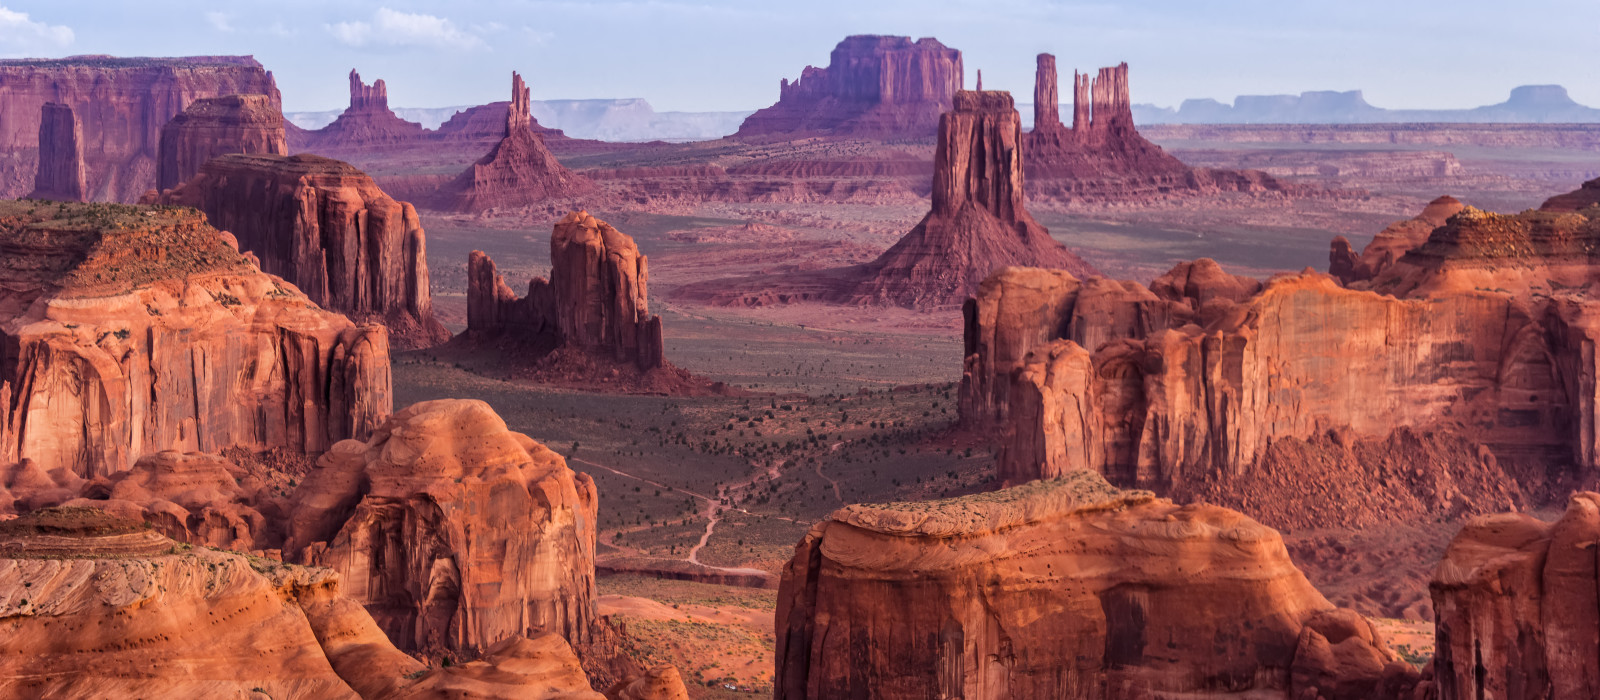 Exclusive Travel Tips For Your Destination Monument Valley Navajo